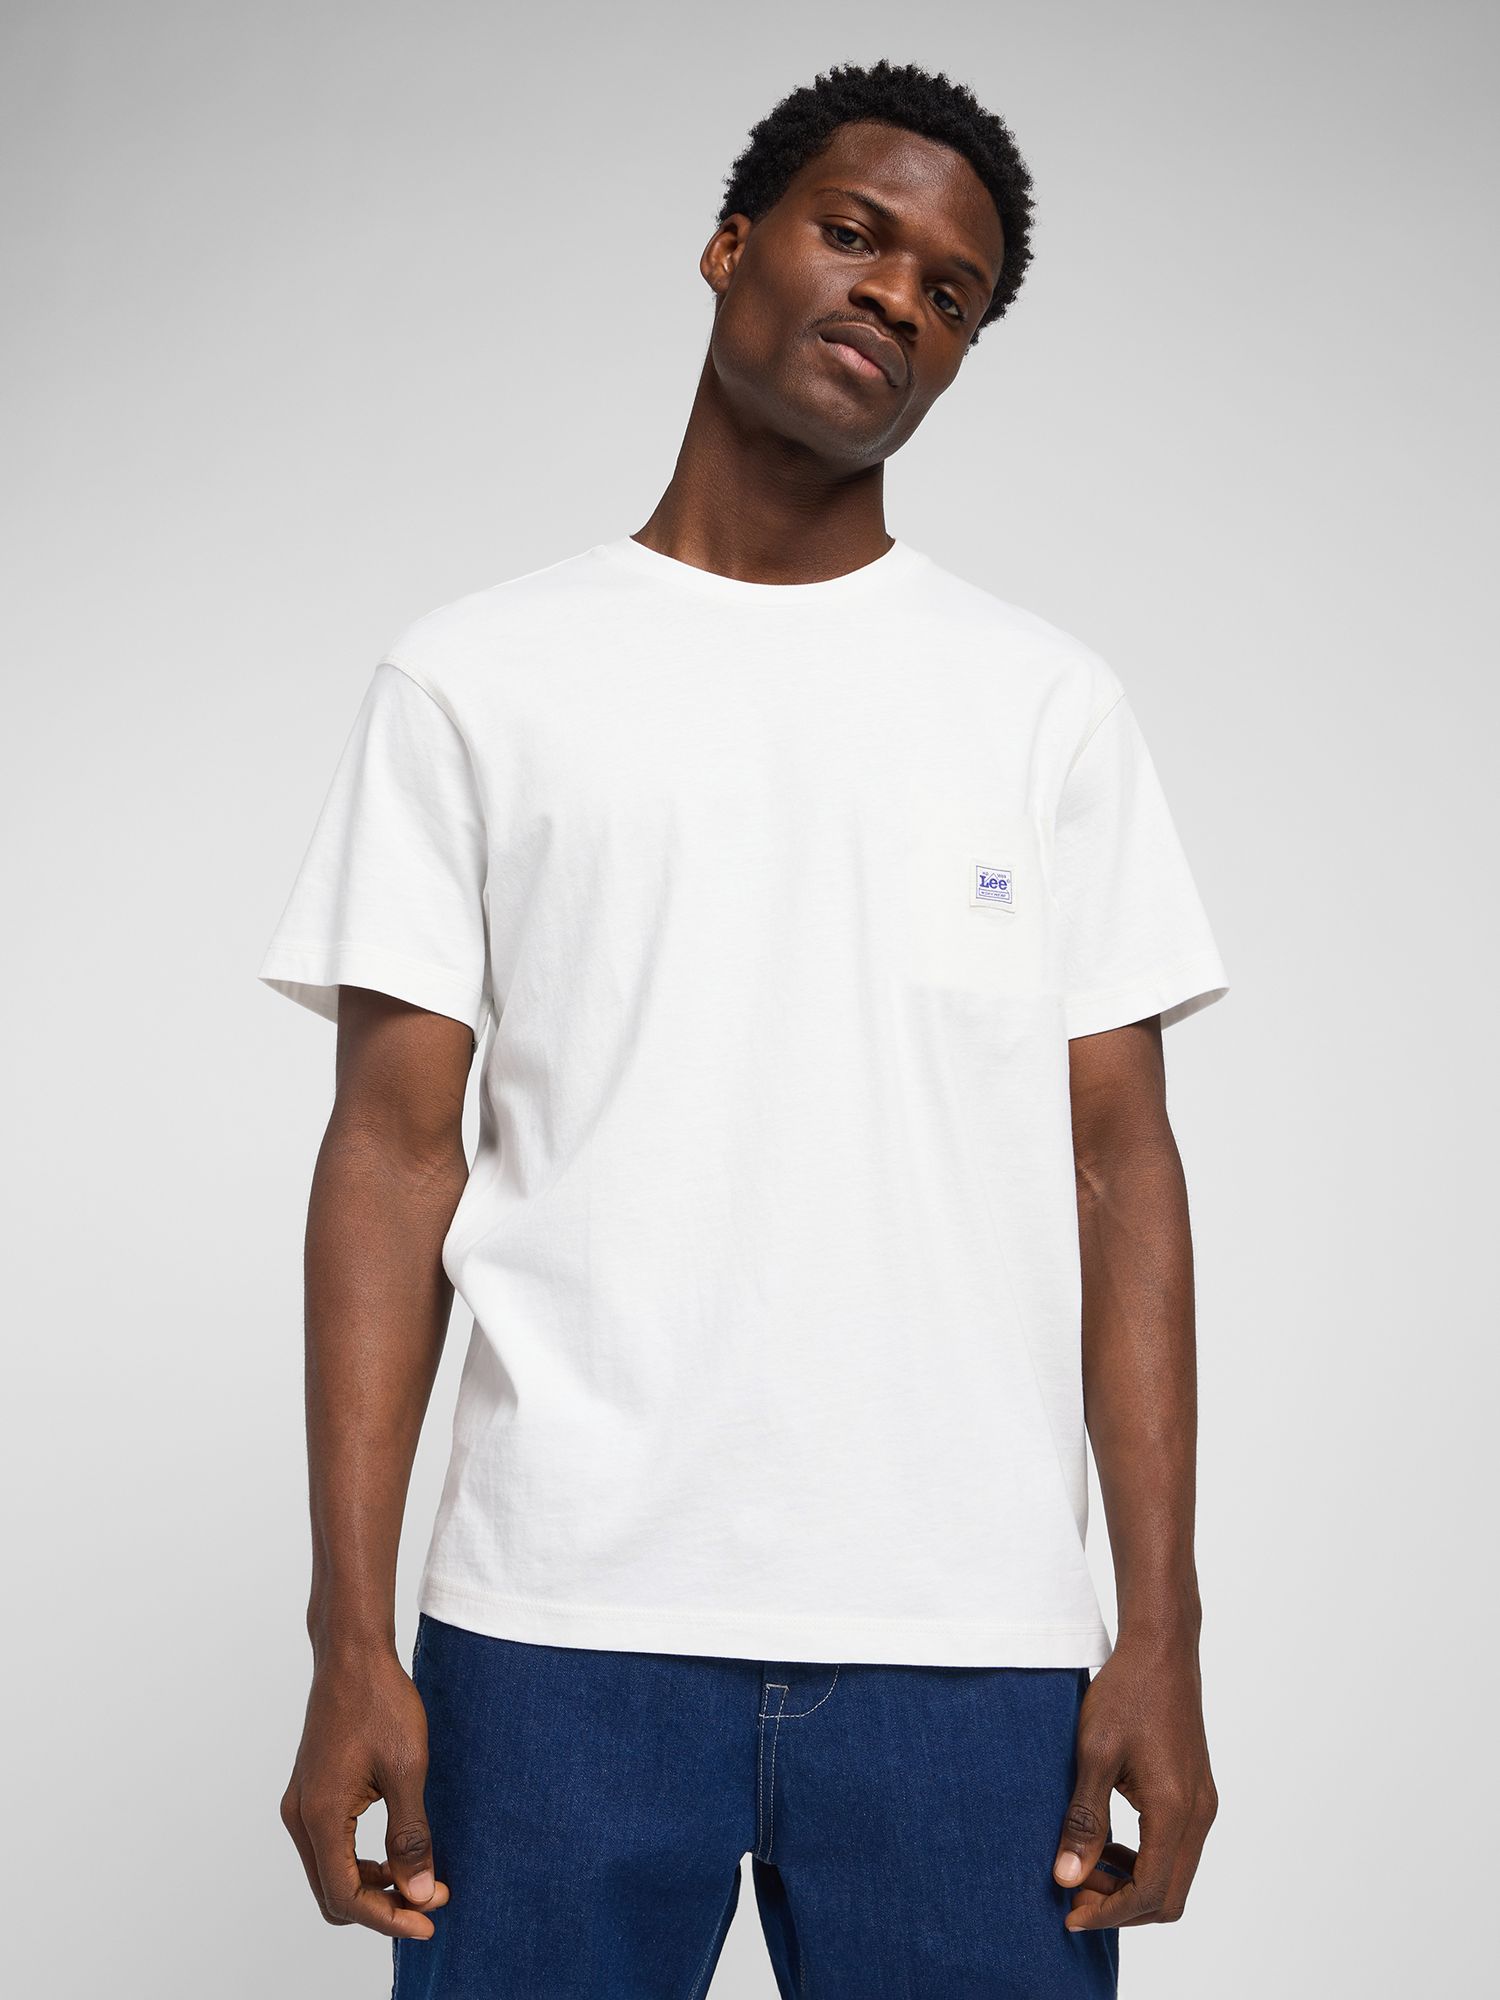 Buy Lee Cotton T-Shirt, Bright White Online at johnlewis.com